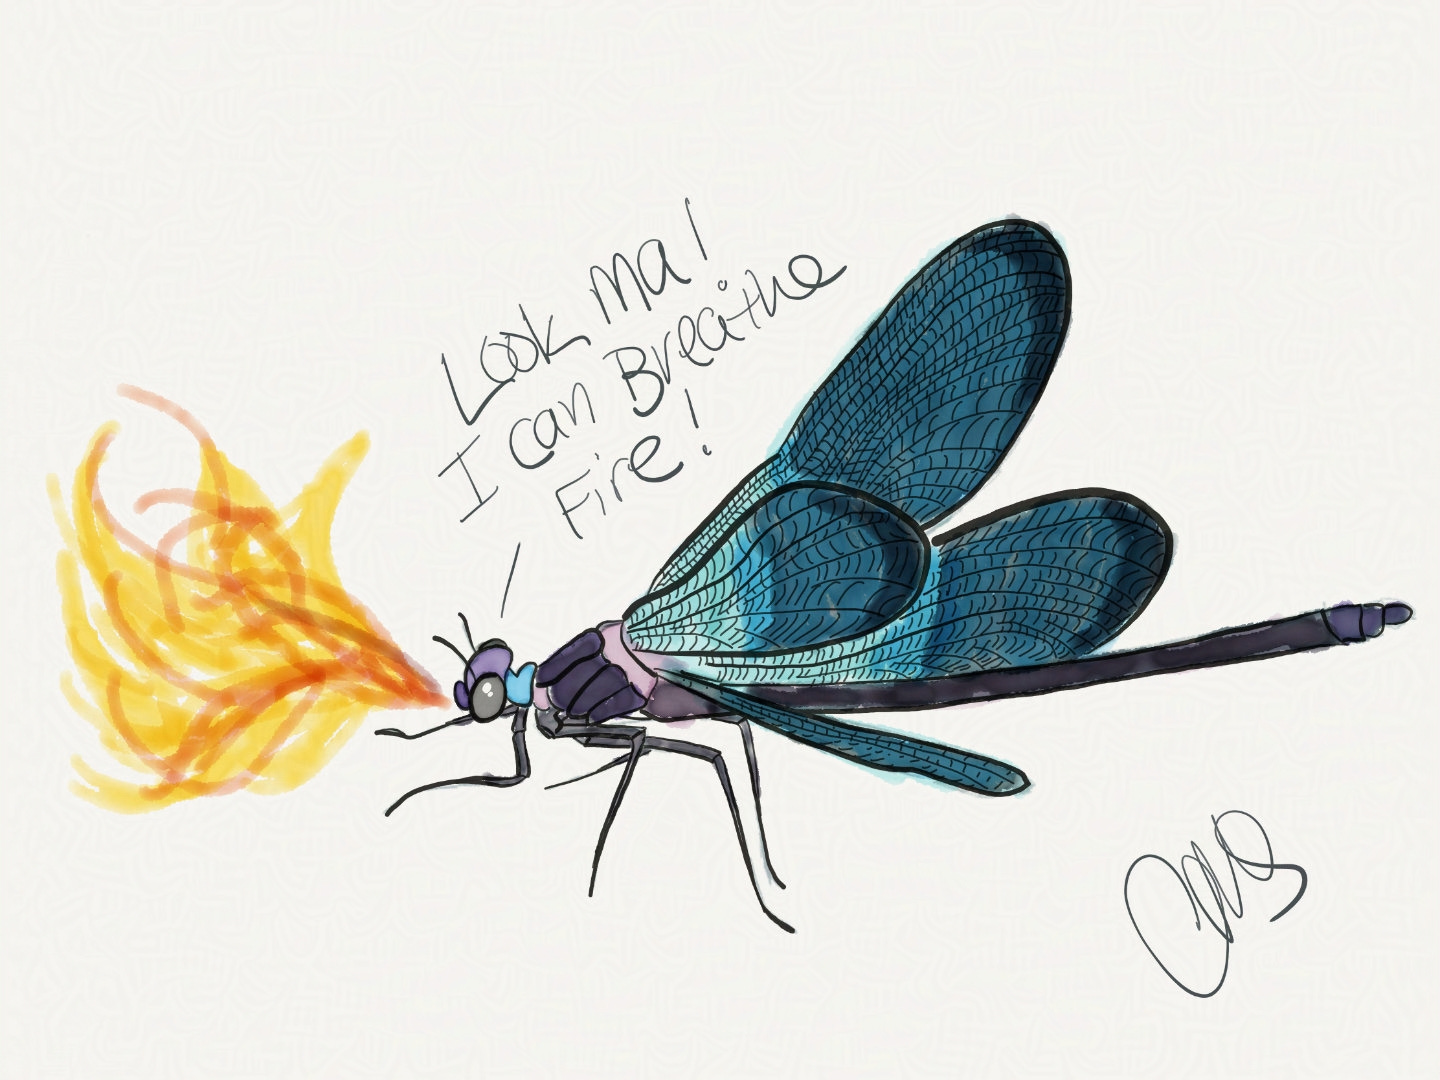 watercolor dragonfly breathing fire, text reads "Look ma! I can Breathe Fire!"